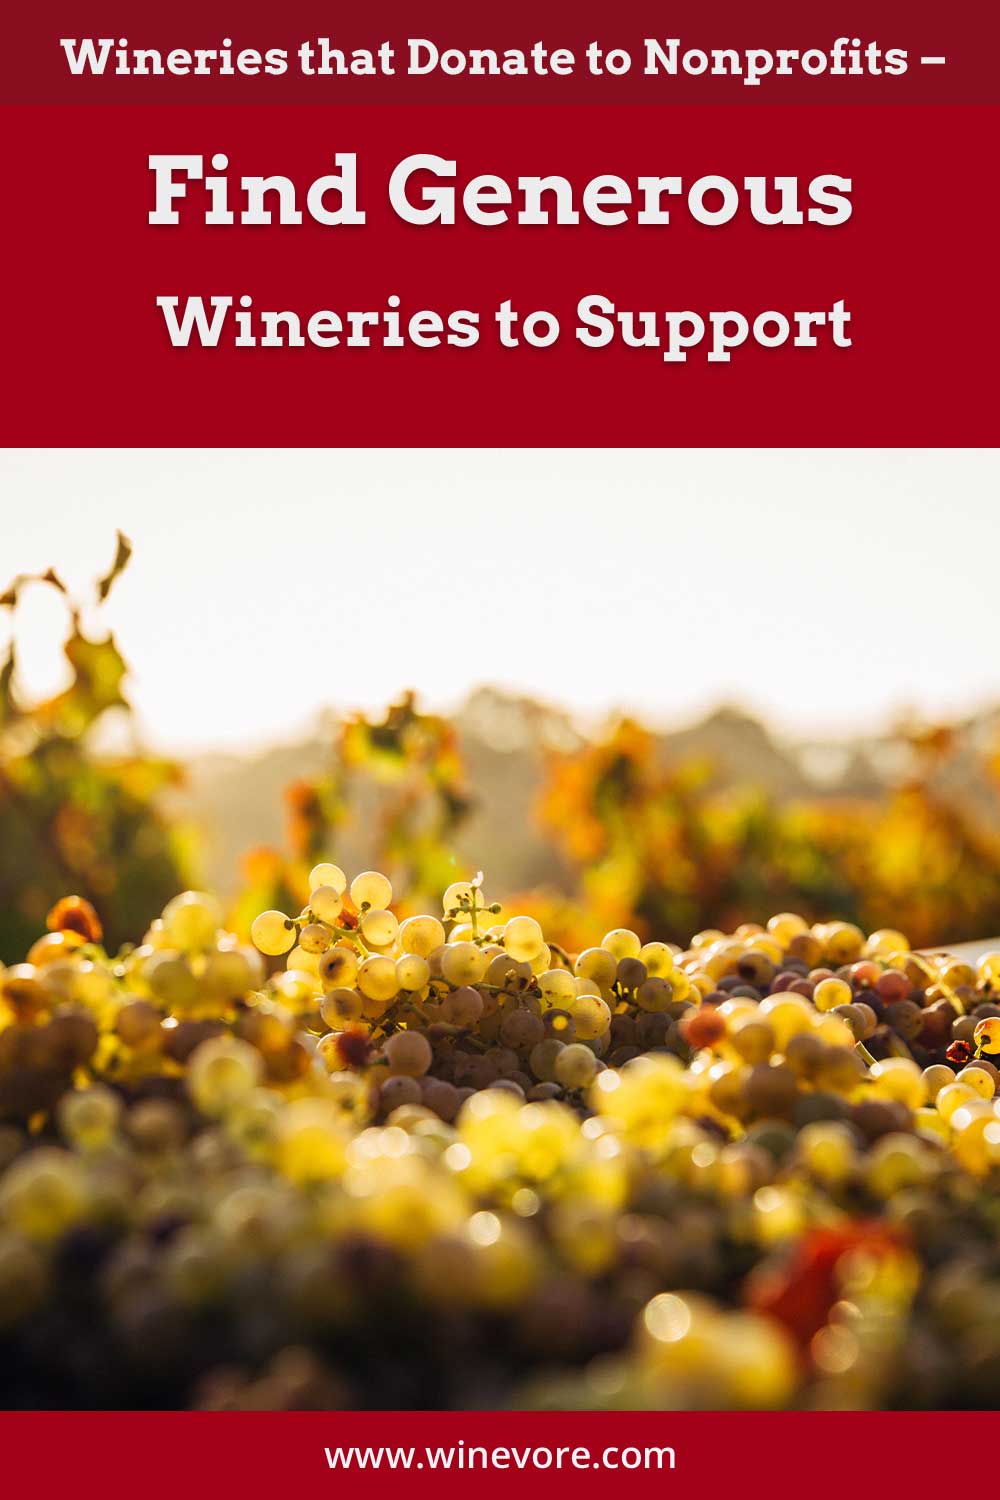 A bunch of grapes in front of wine field - Wineries that Donate to Nonprofits.